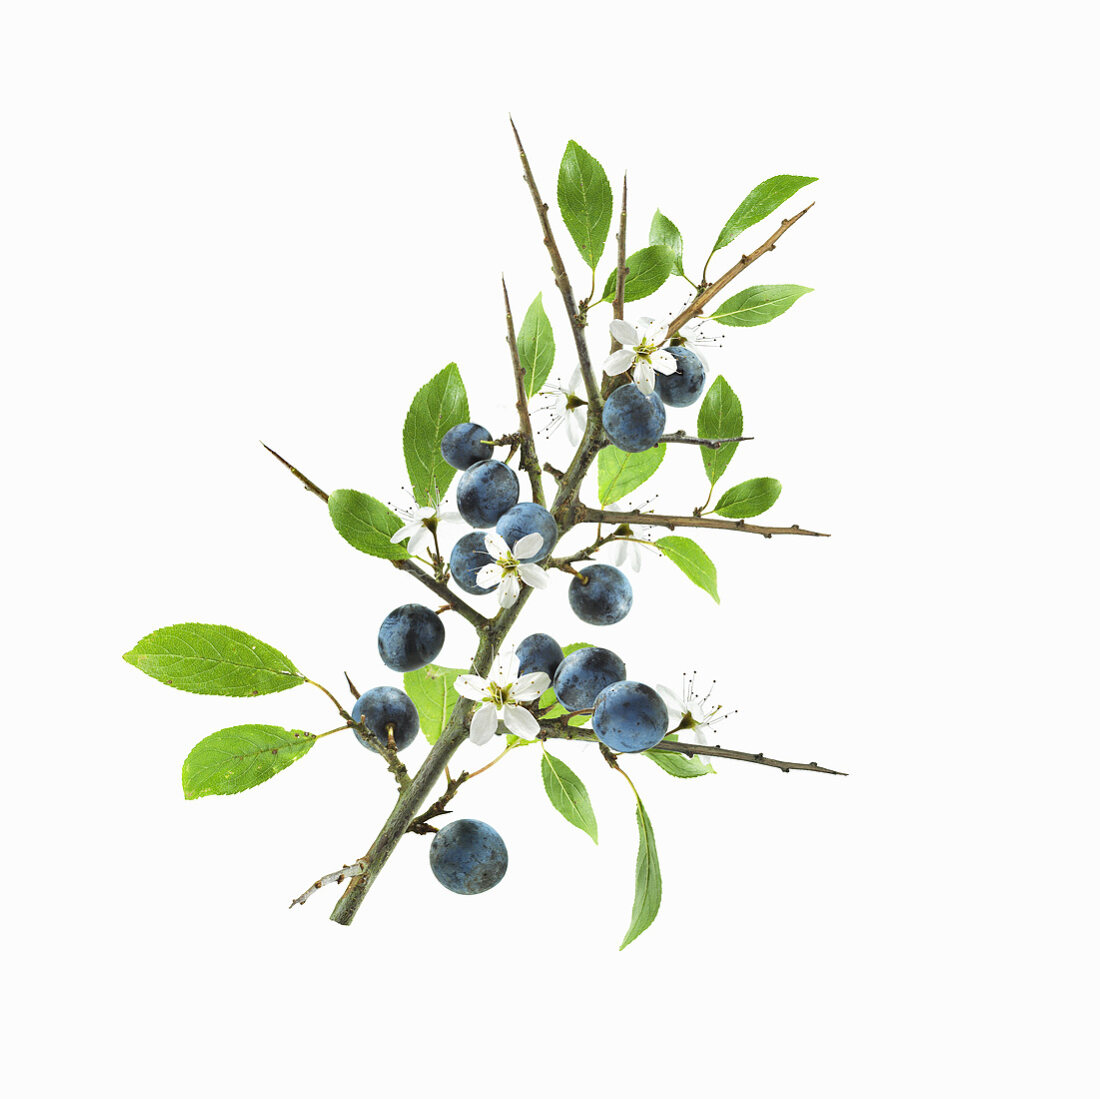 Sloes and blossom on branch